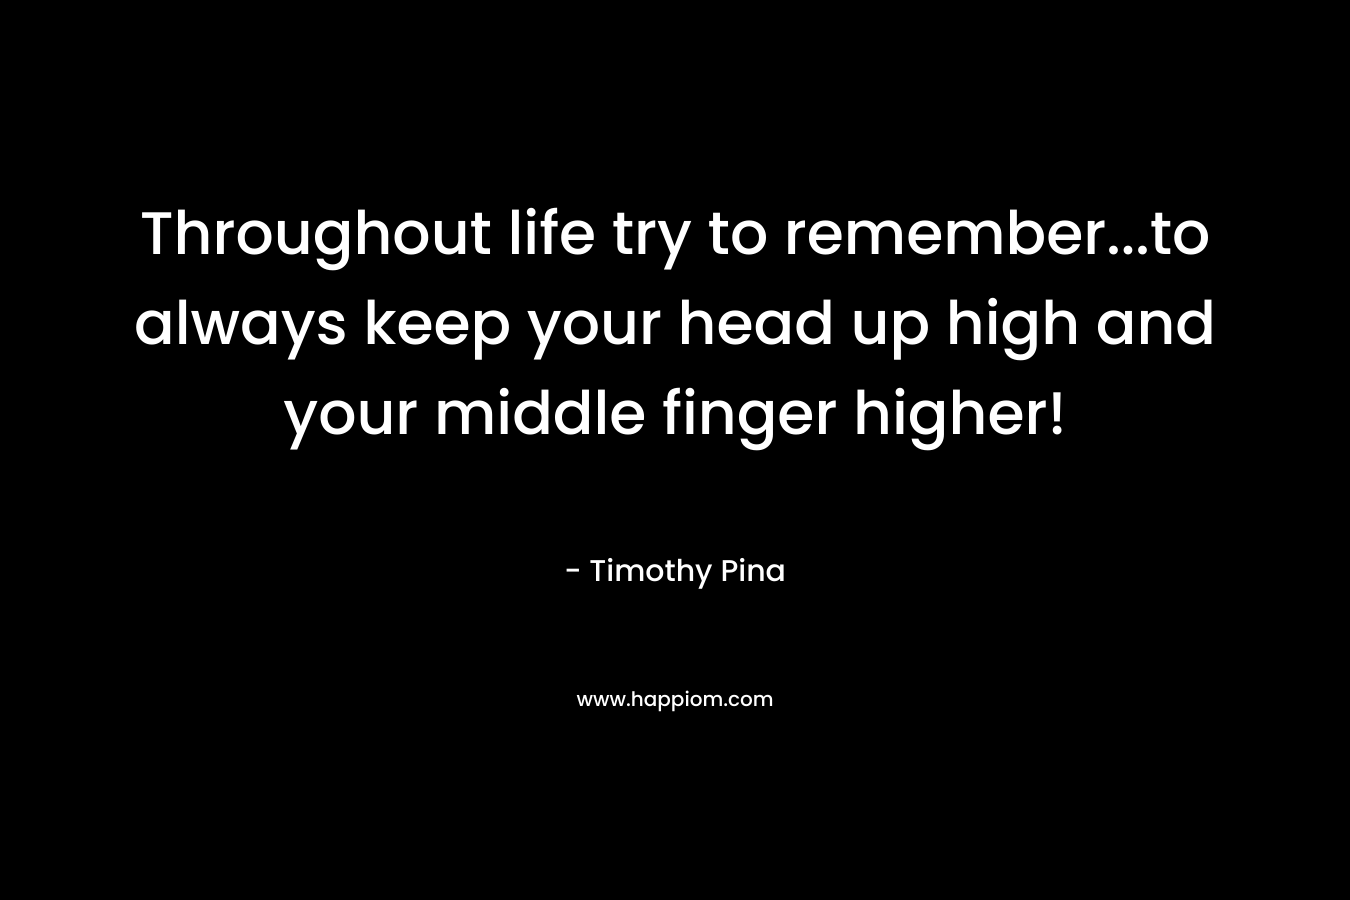 Throughout life try to remember...to always keep your head up high and your middle finger higher!